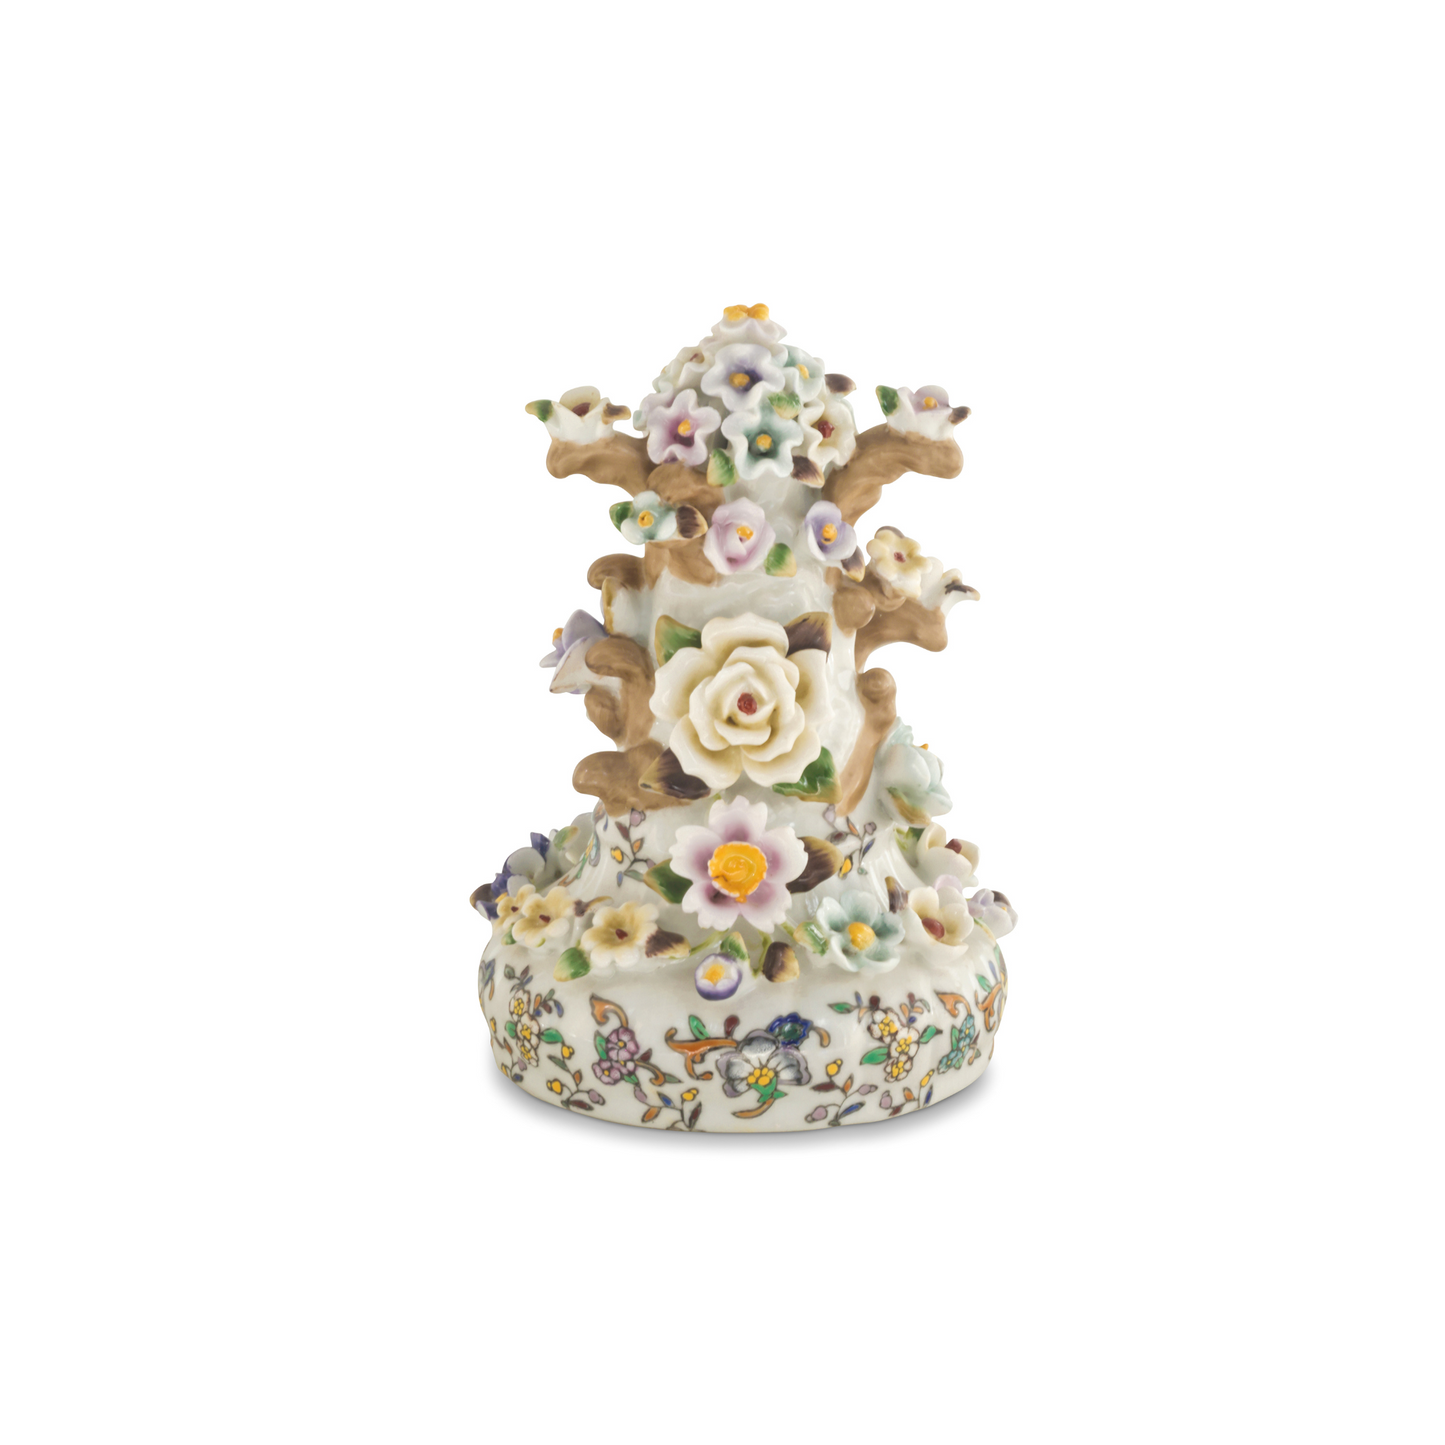 Porcelain Hand-painted Flower Three Dimensional Urn